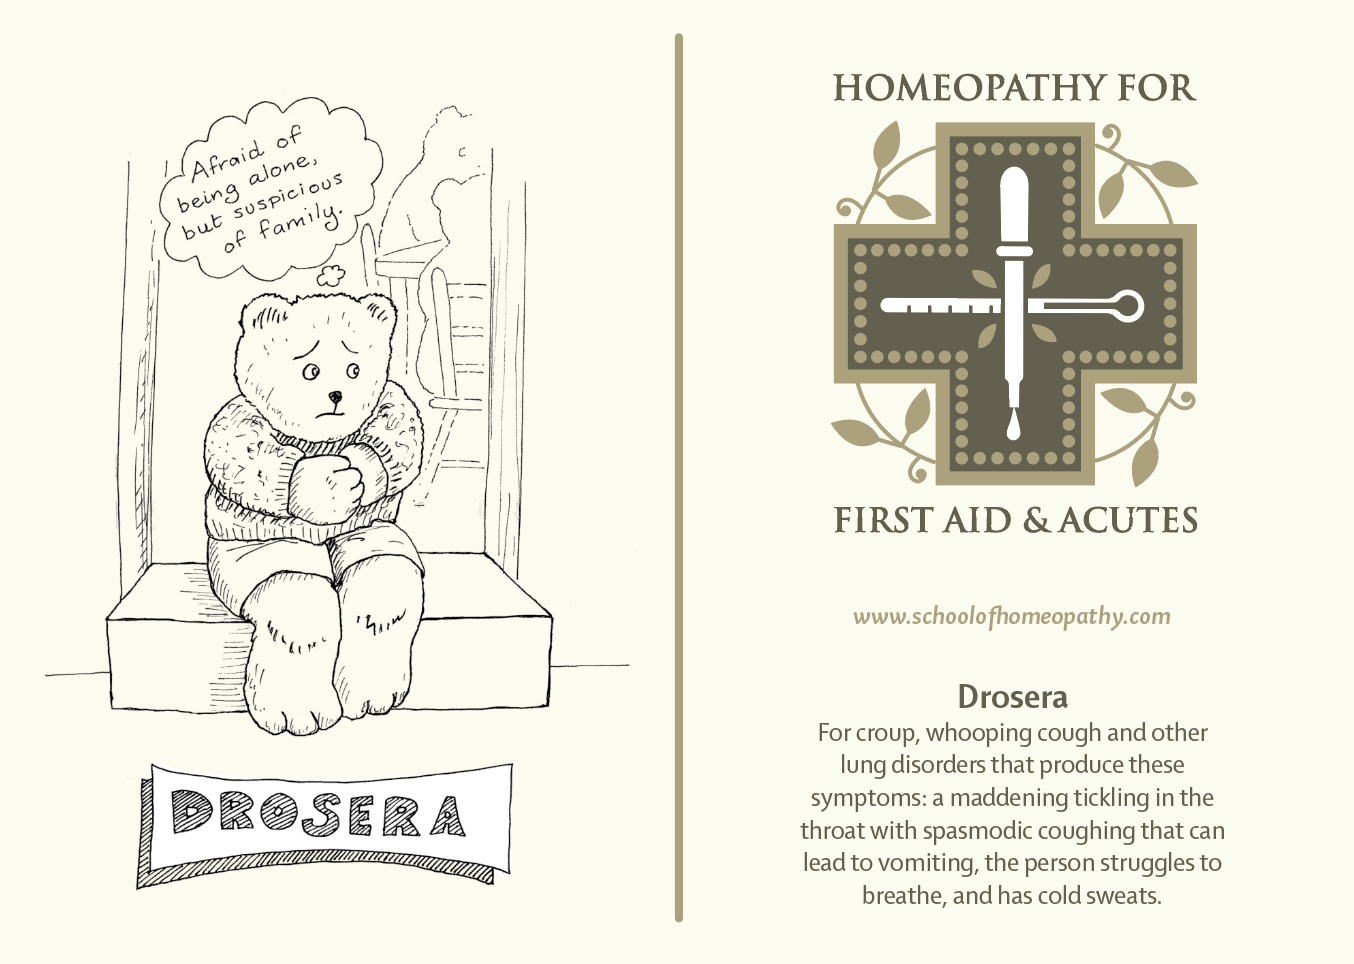 Homeopathy for First Aid & Acutes - Arnica